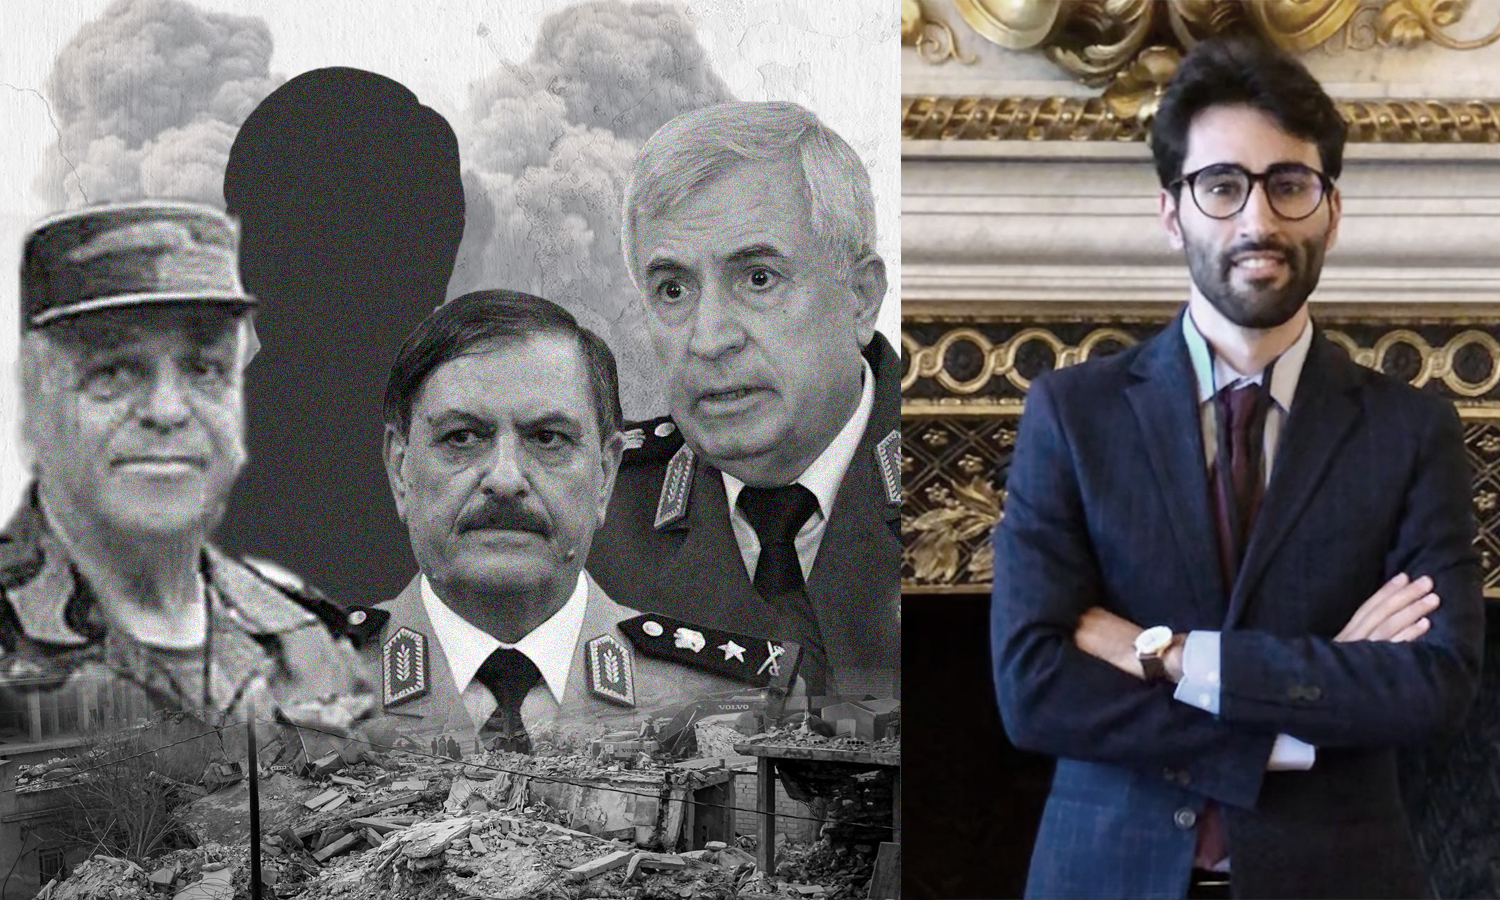 Two photos attached. The first to the left shows an image of Gen. Ali Abdullah Ayoub (R), Gen. Fahd Jassim al-Freij (C), and M. Gen Ahmed Baloul (L). The photo to the right shows Omar Salah Abu Nabout (Edited by Enab Baladi)